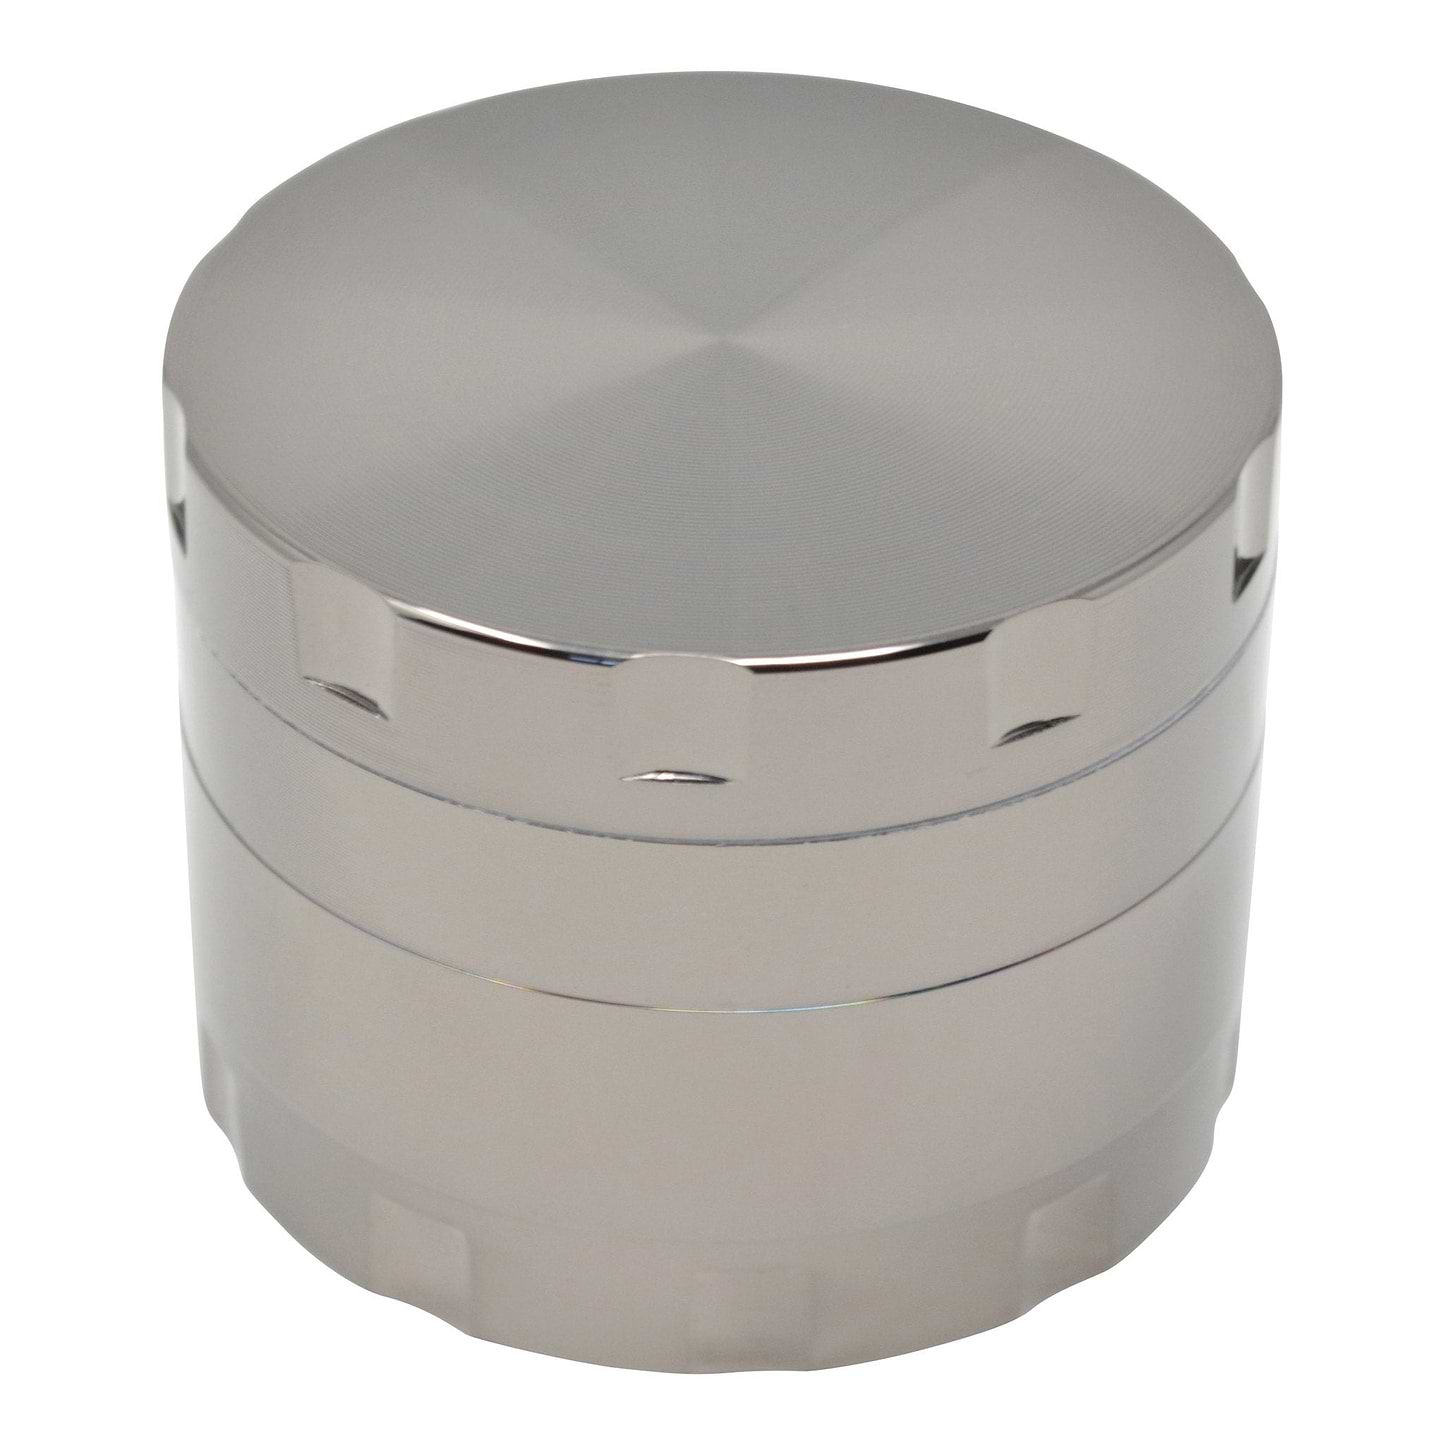 High angle shot of a closed 48mm silver grinder smoking accessory lid with smooth surface ridges on the side